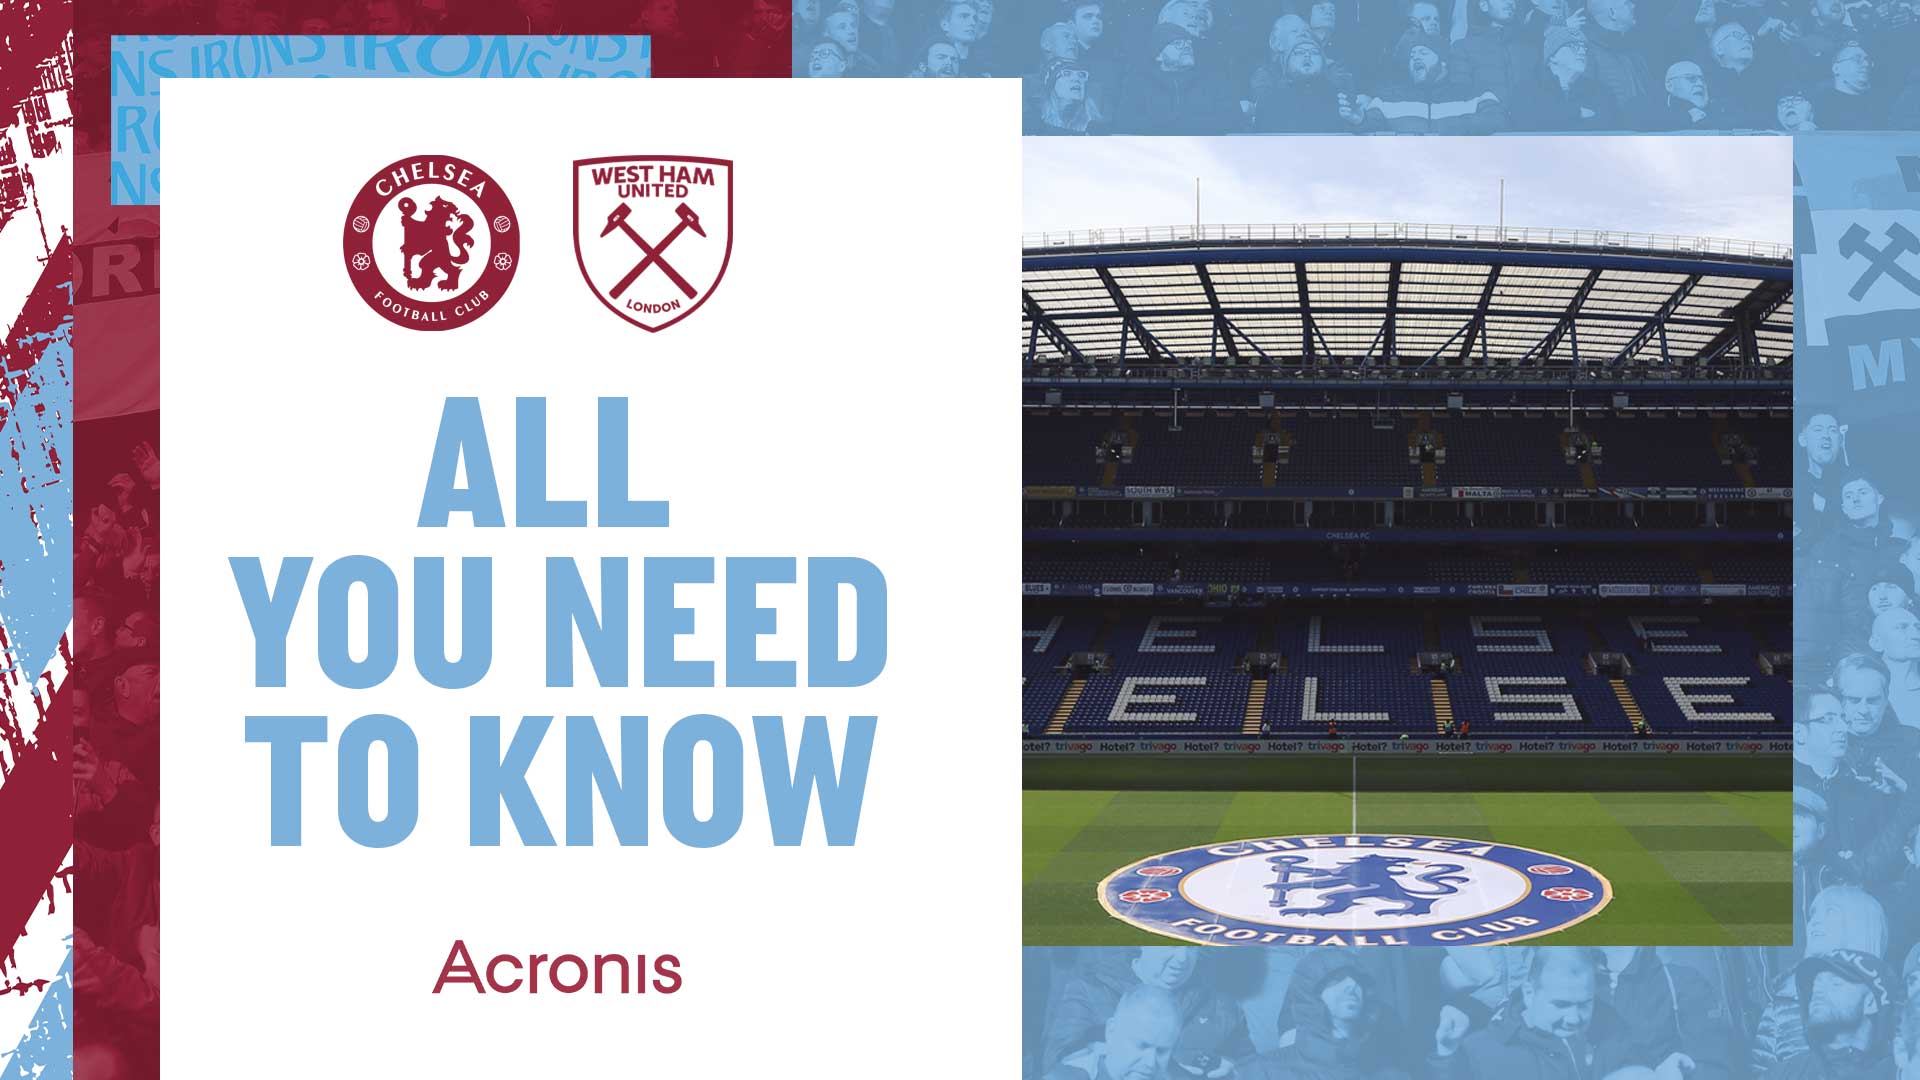 Trivago and Chelsea team up to provide the ultimate fan experience